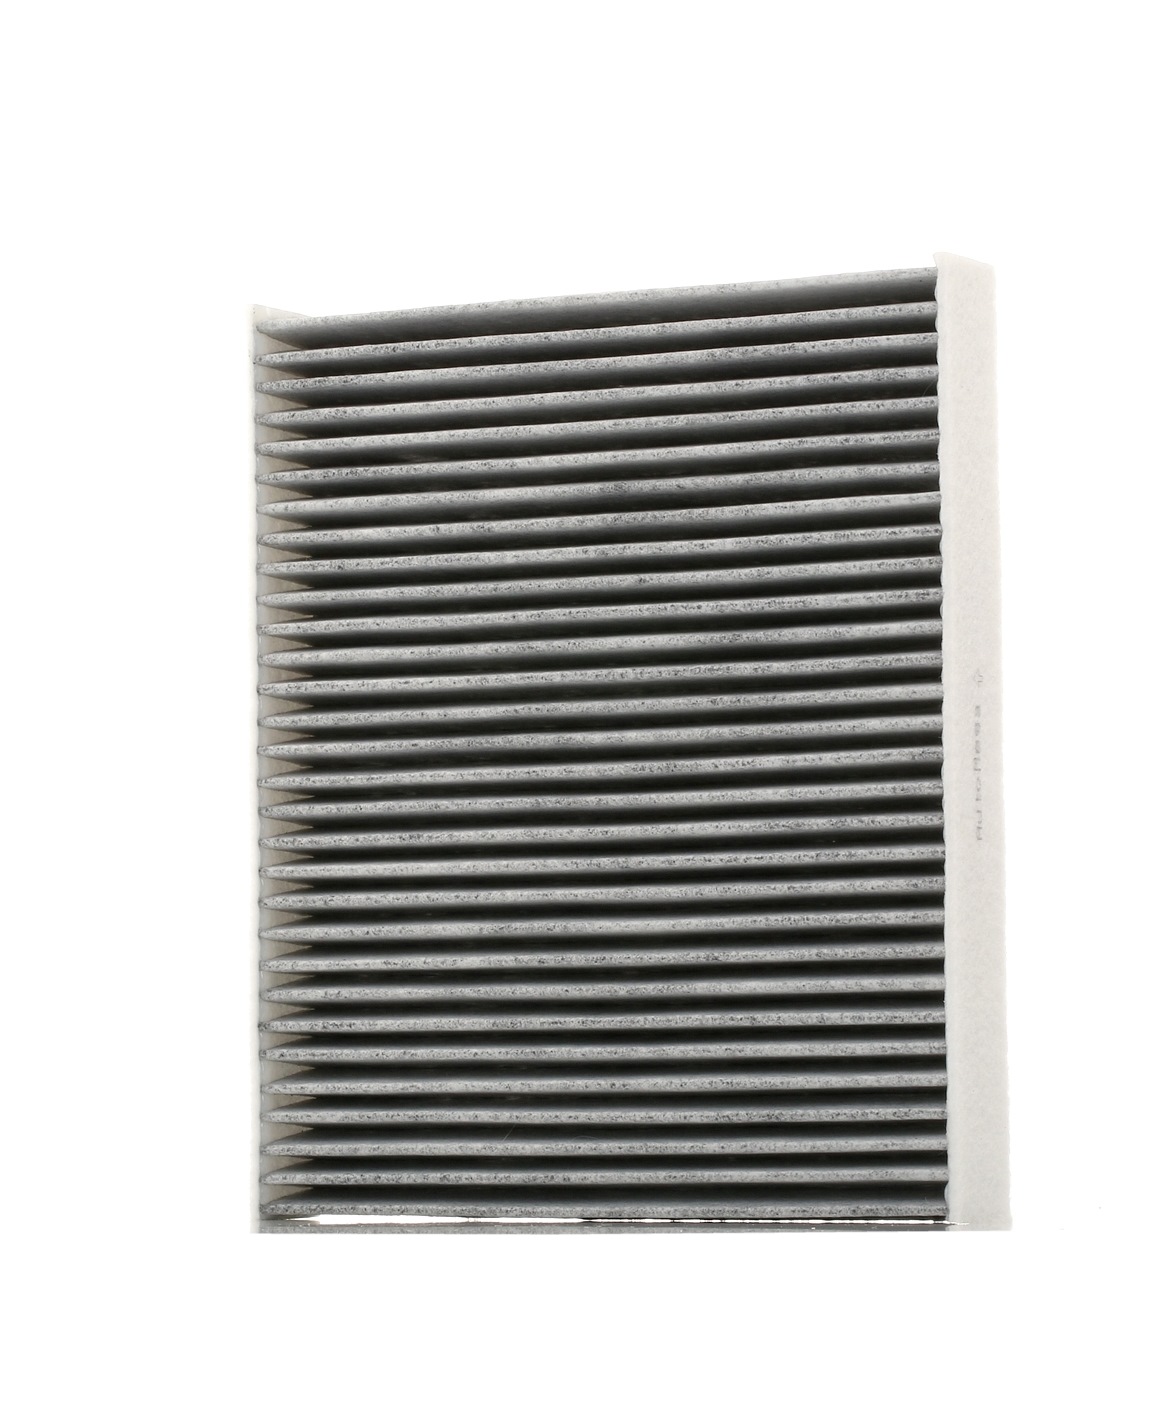 Pollen filter AUTOMEGA Activated Carbon Filter, 240 mm x 204 mm x 30 mm - 180006210